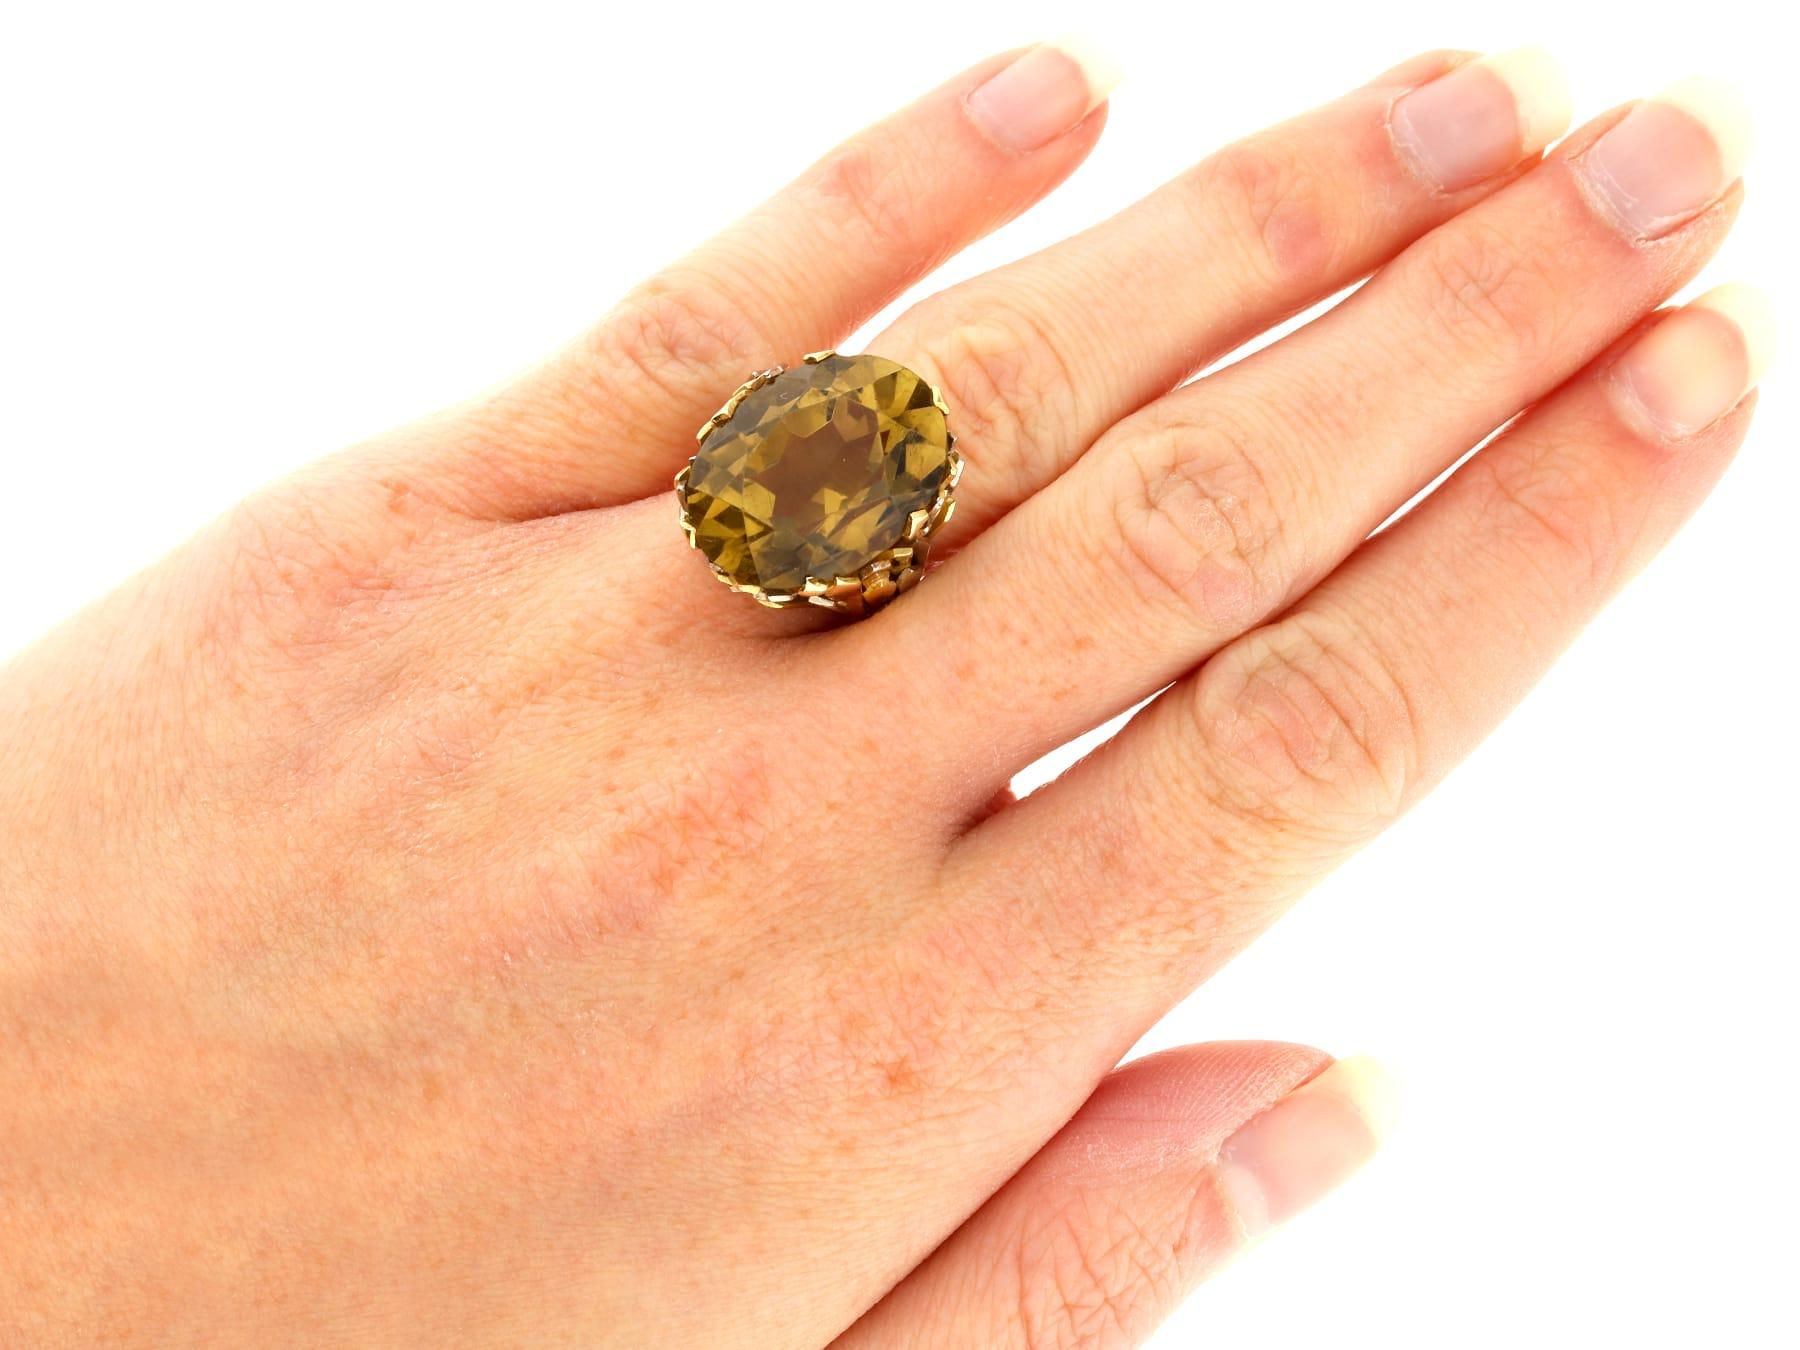 Vintage 19.05Ct Smoky Quartz and 18k Yellow Gold Cocktail Ring Circa 1970 For Sale 3